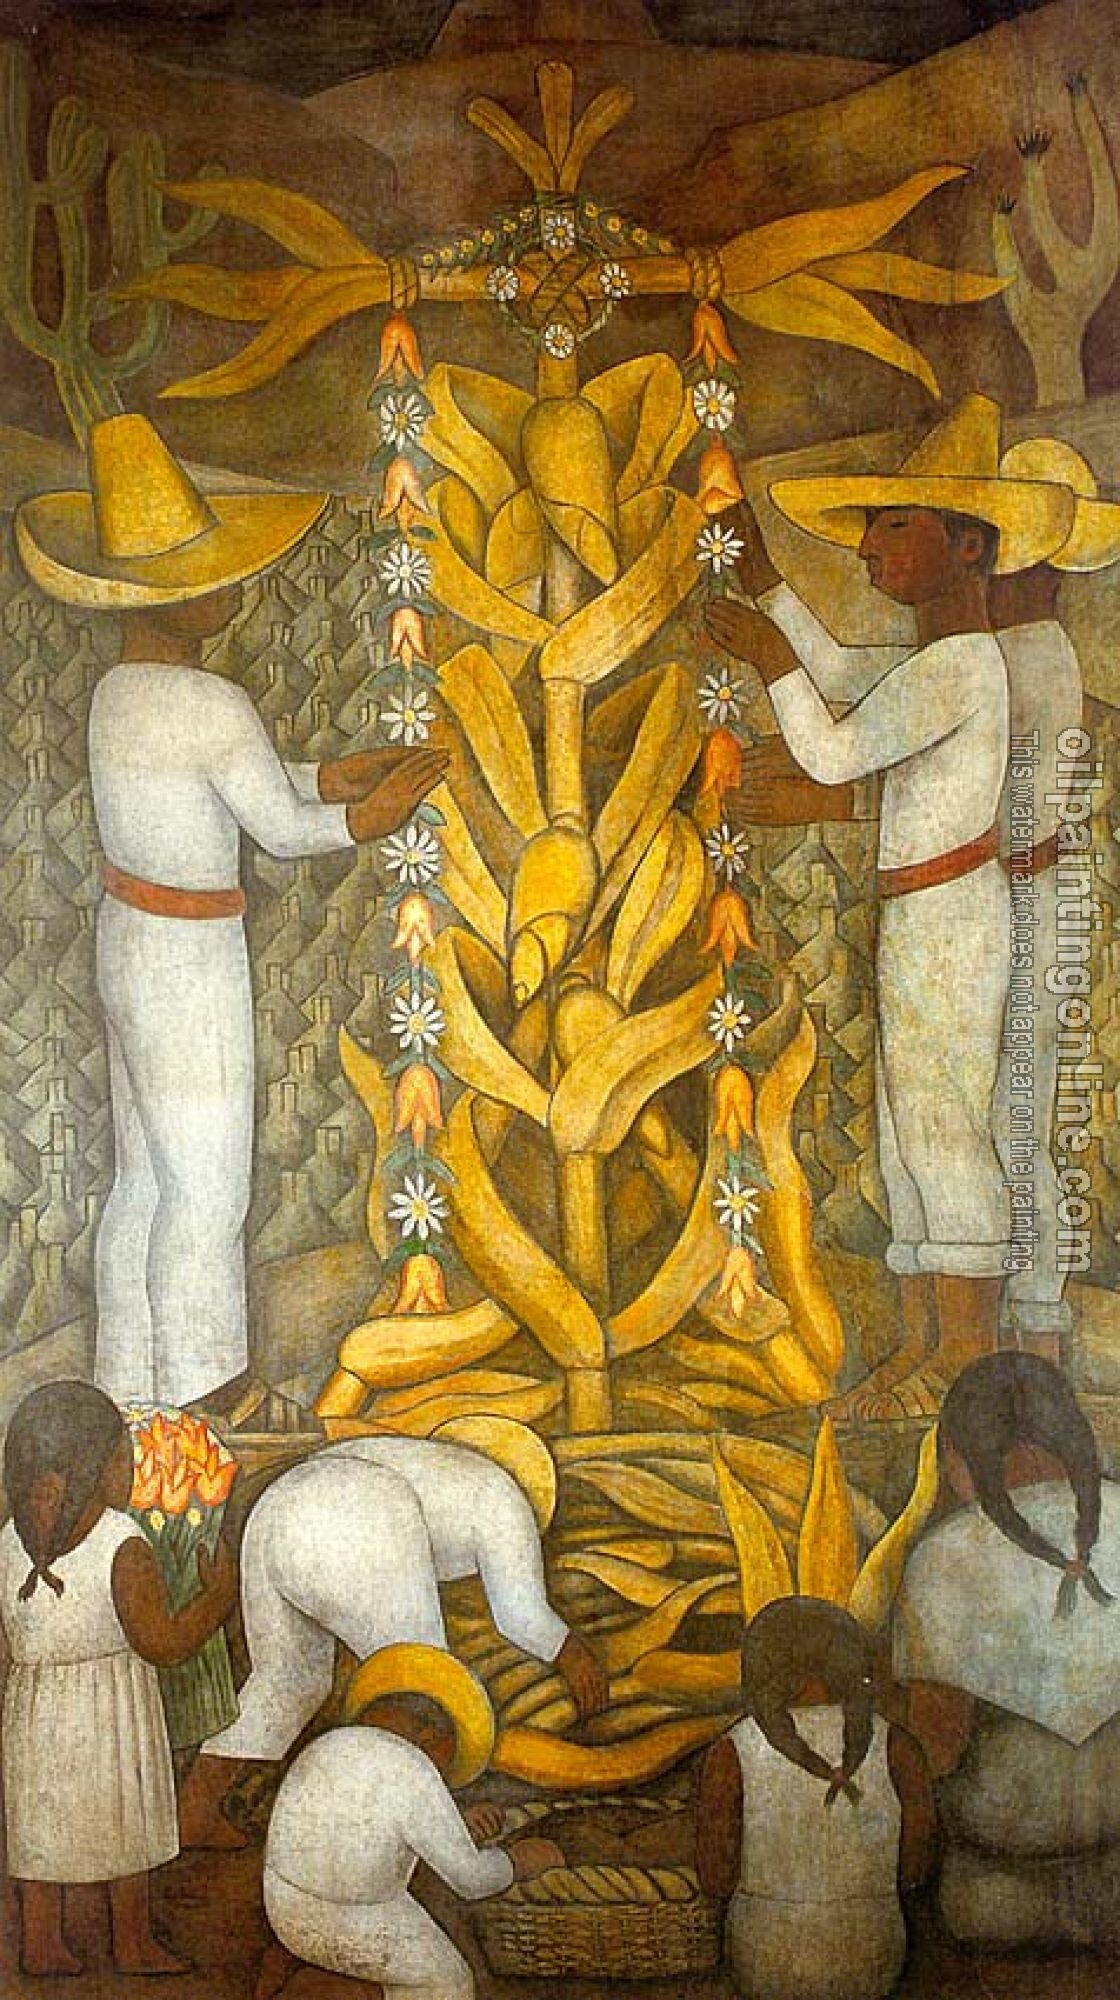 Rivera, Diego - The Maize Festival ,La fiesta del maiz, from the cycle,Political Vision of the Mexican People